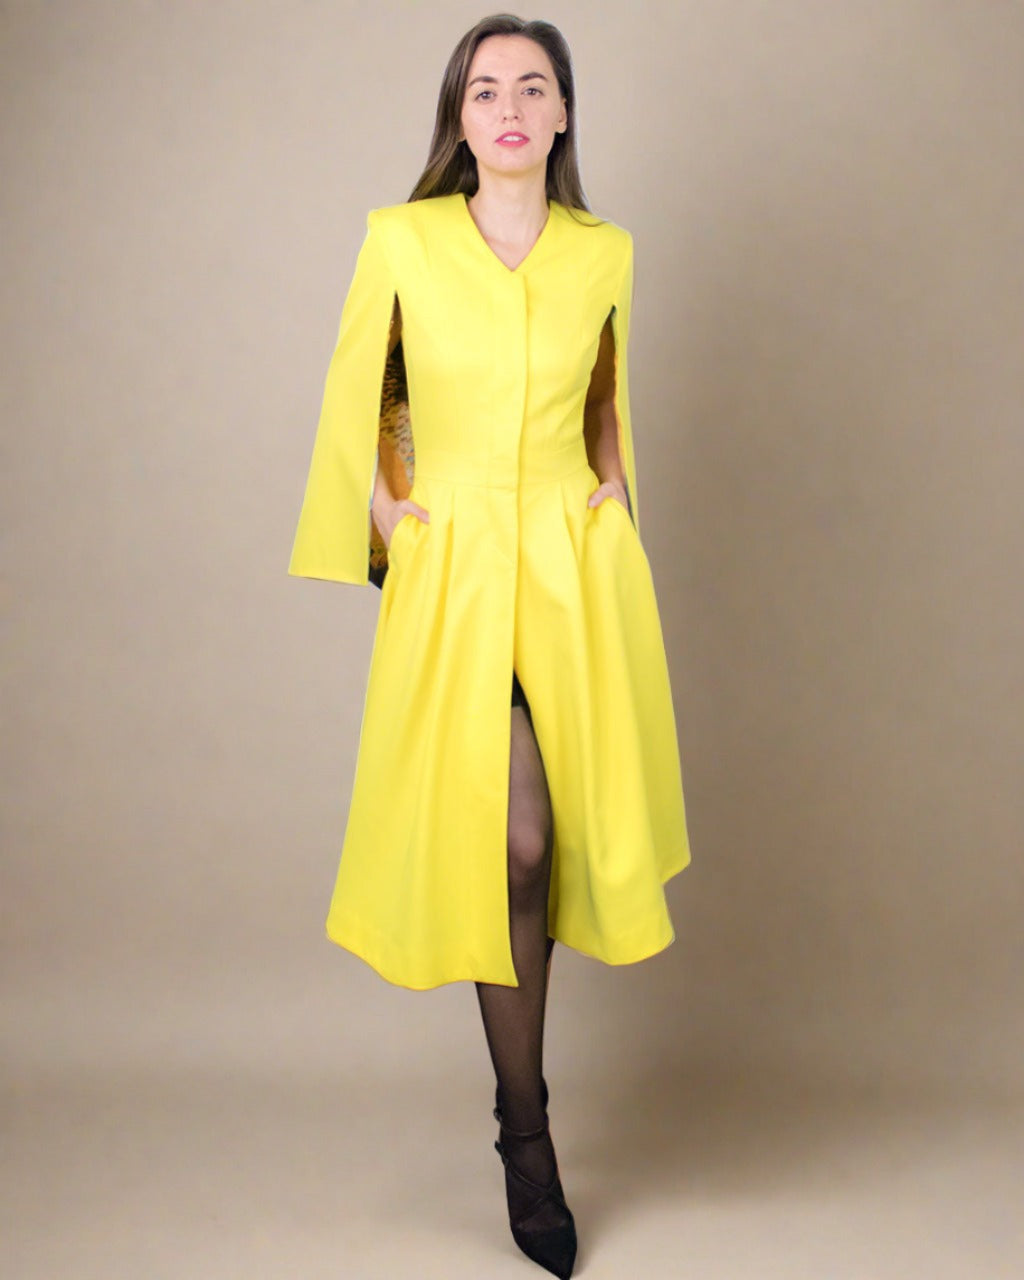 Yellow waterproof cape Raincoat stylish jacket women's ADKN with designer satin lining made in UK from sustainable materials